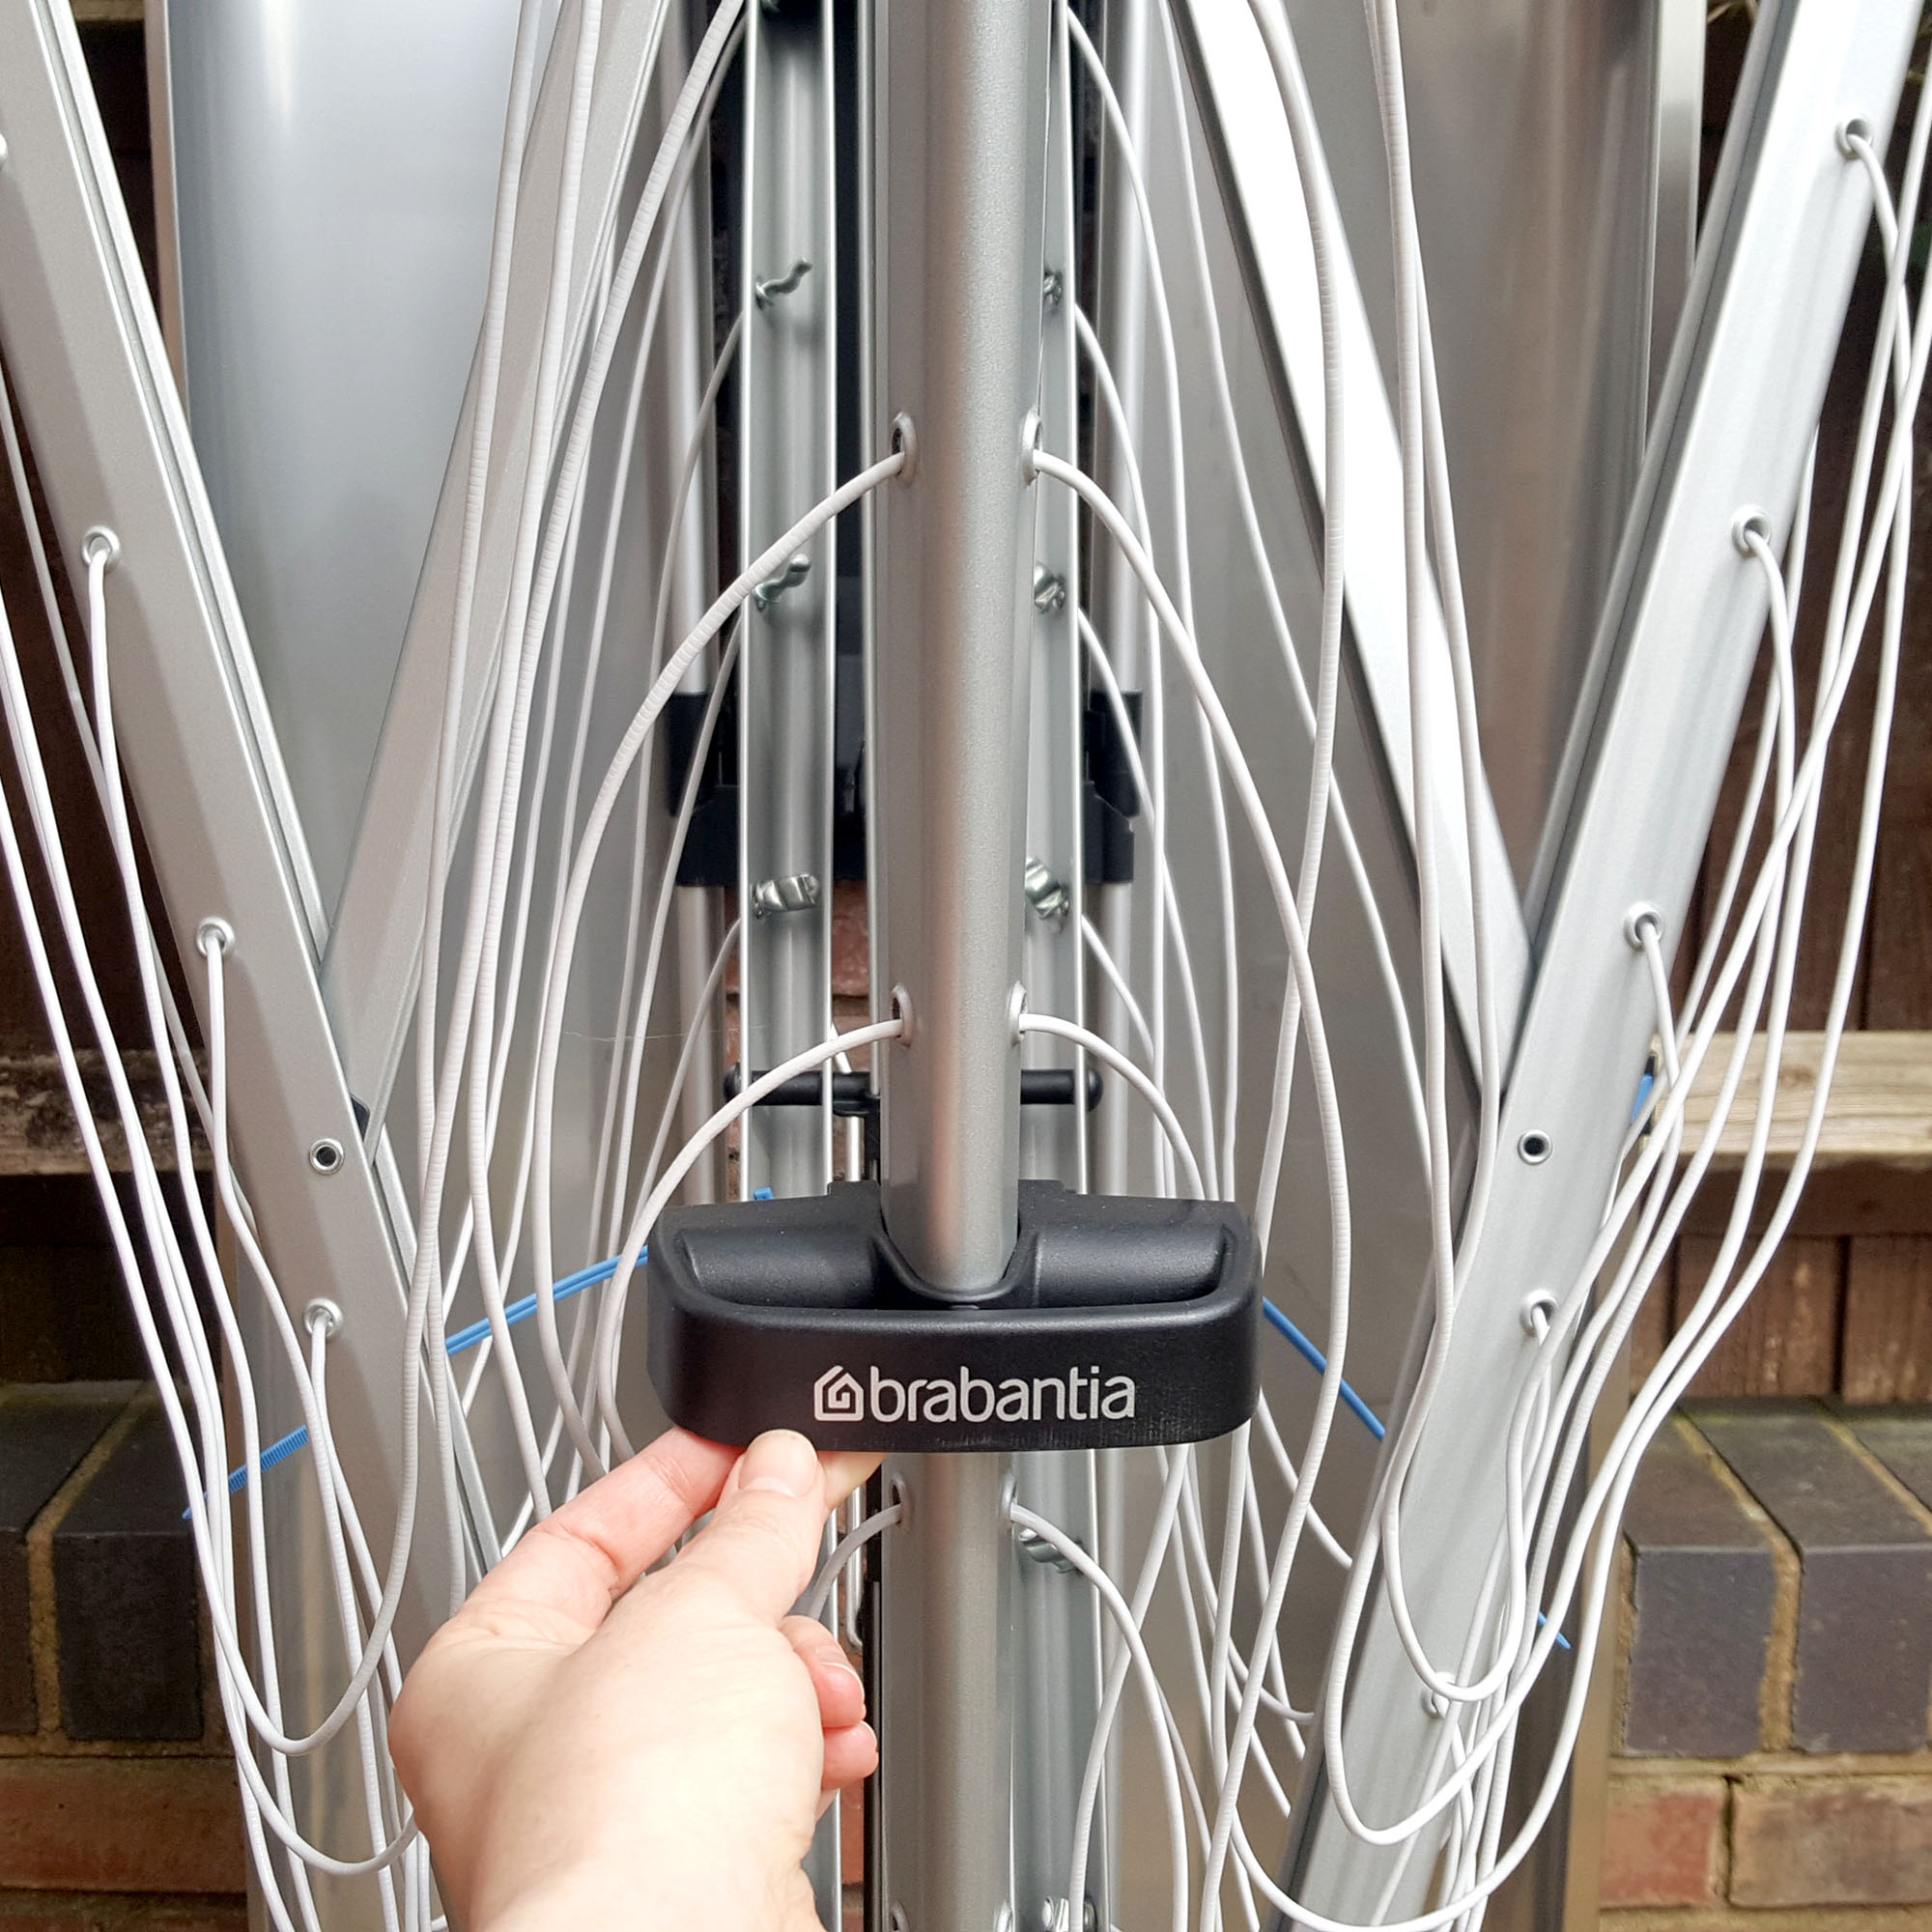 The Brabantia Wallfix Dryer mounted in a small patio